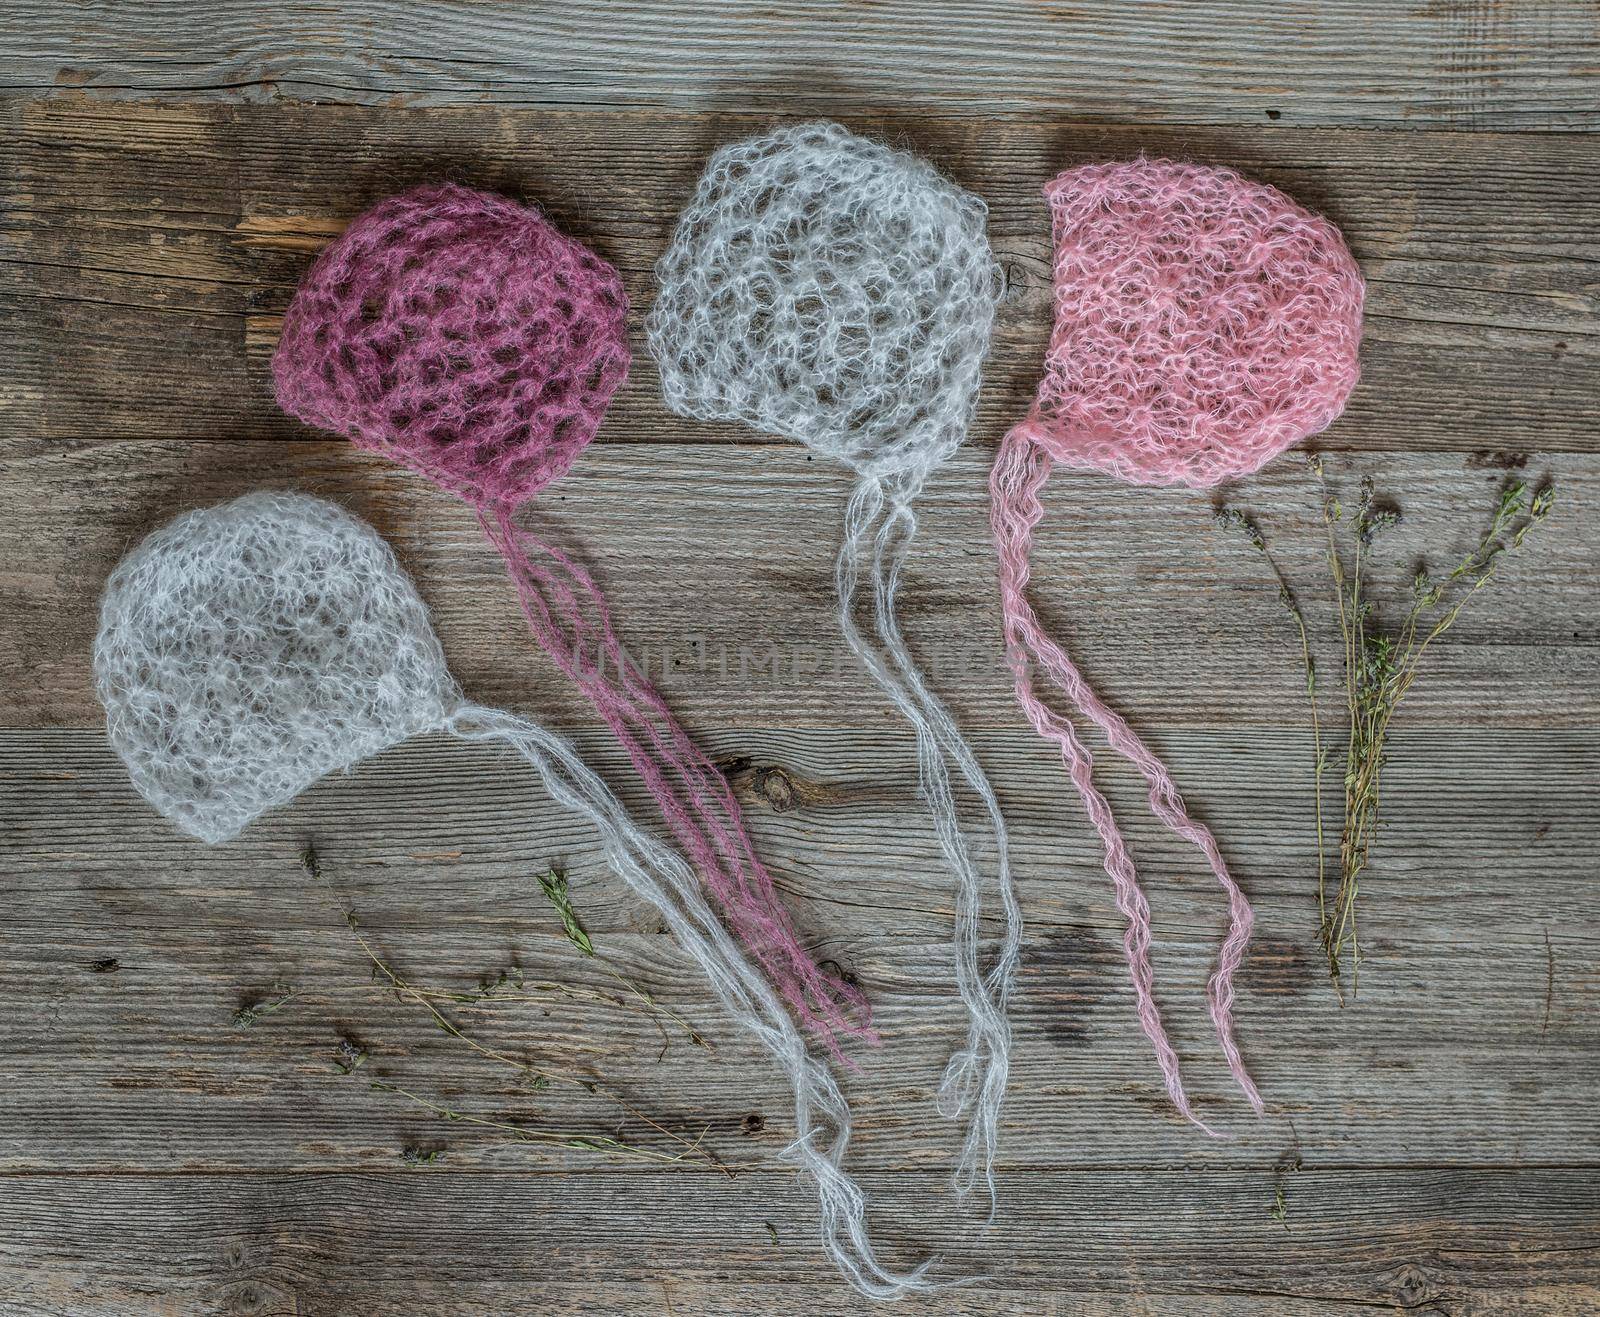 set of tender knitted pink and white hats for newborn on wooden background